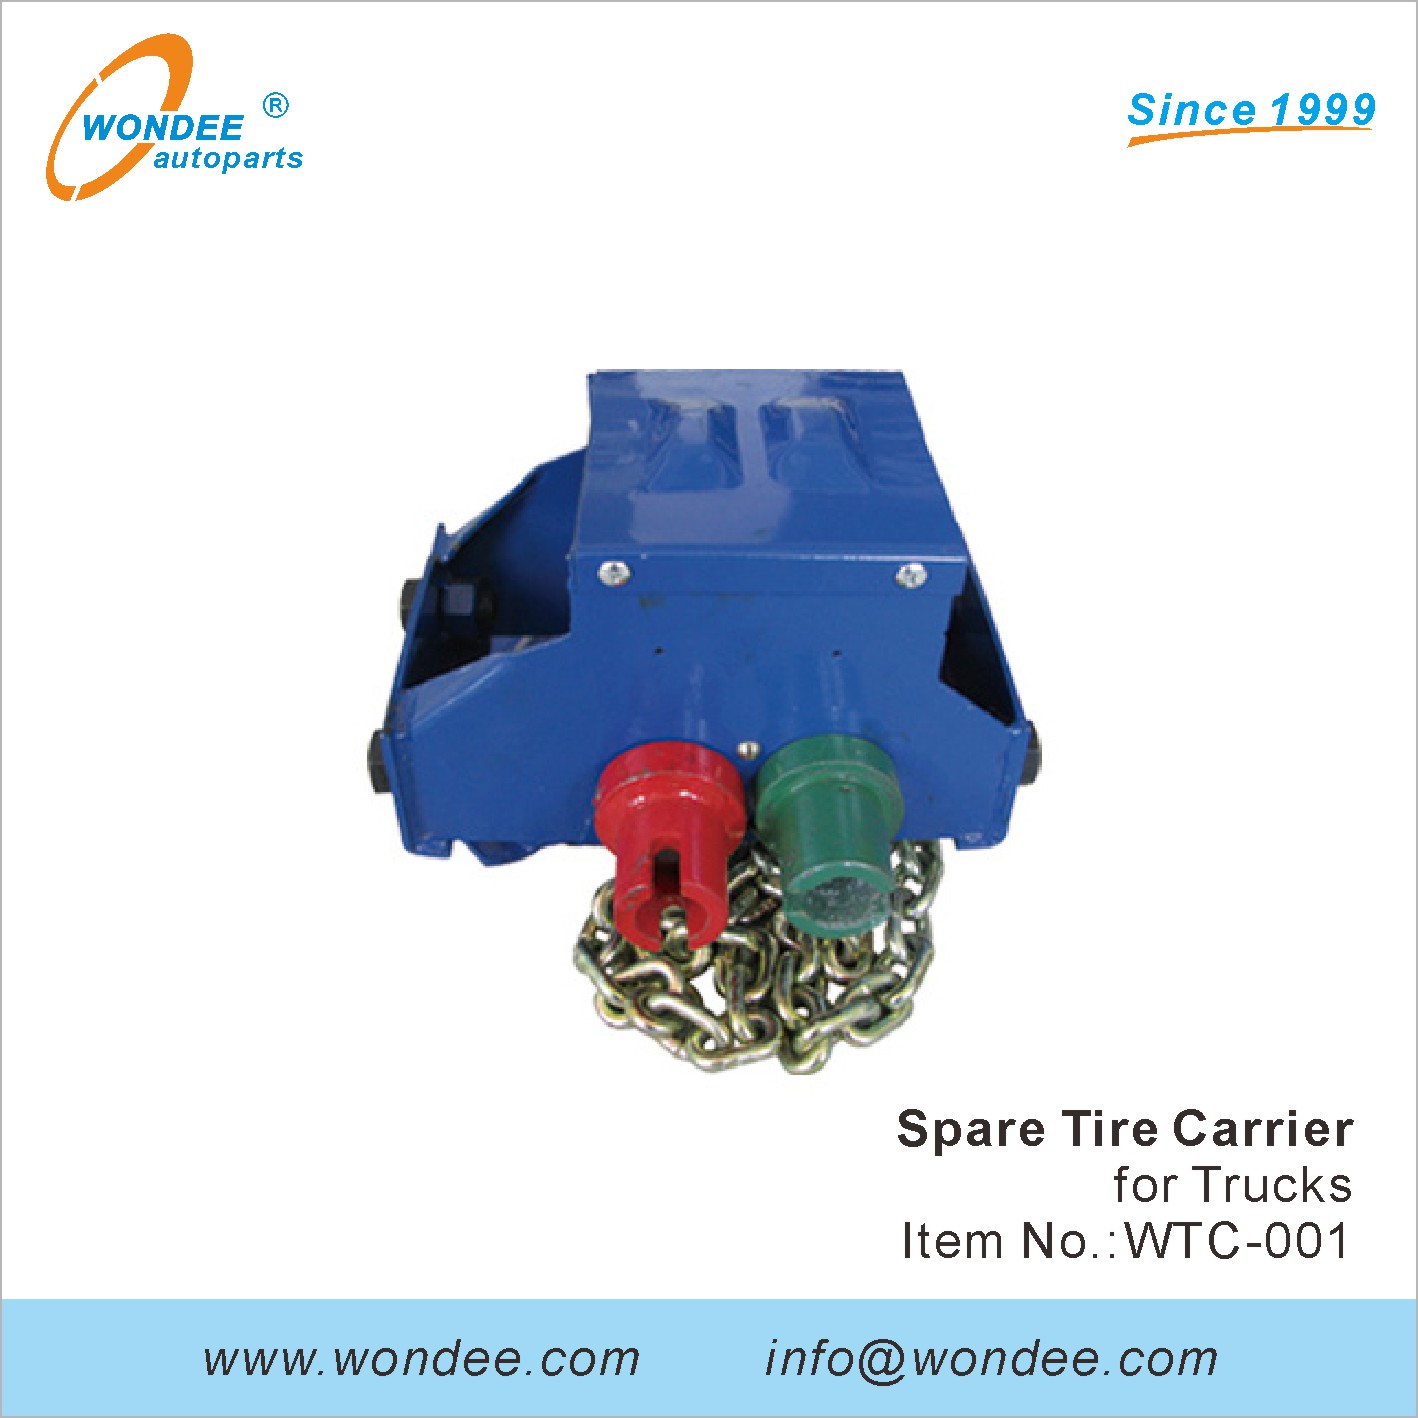 WONDEE spare tire carrier (1)